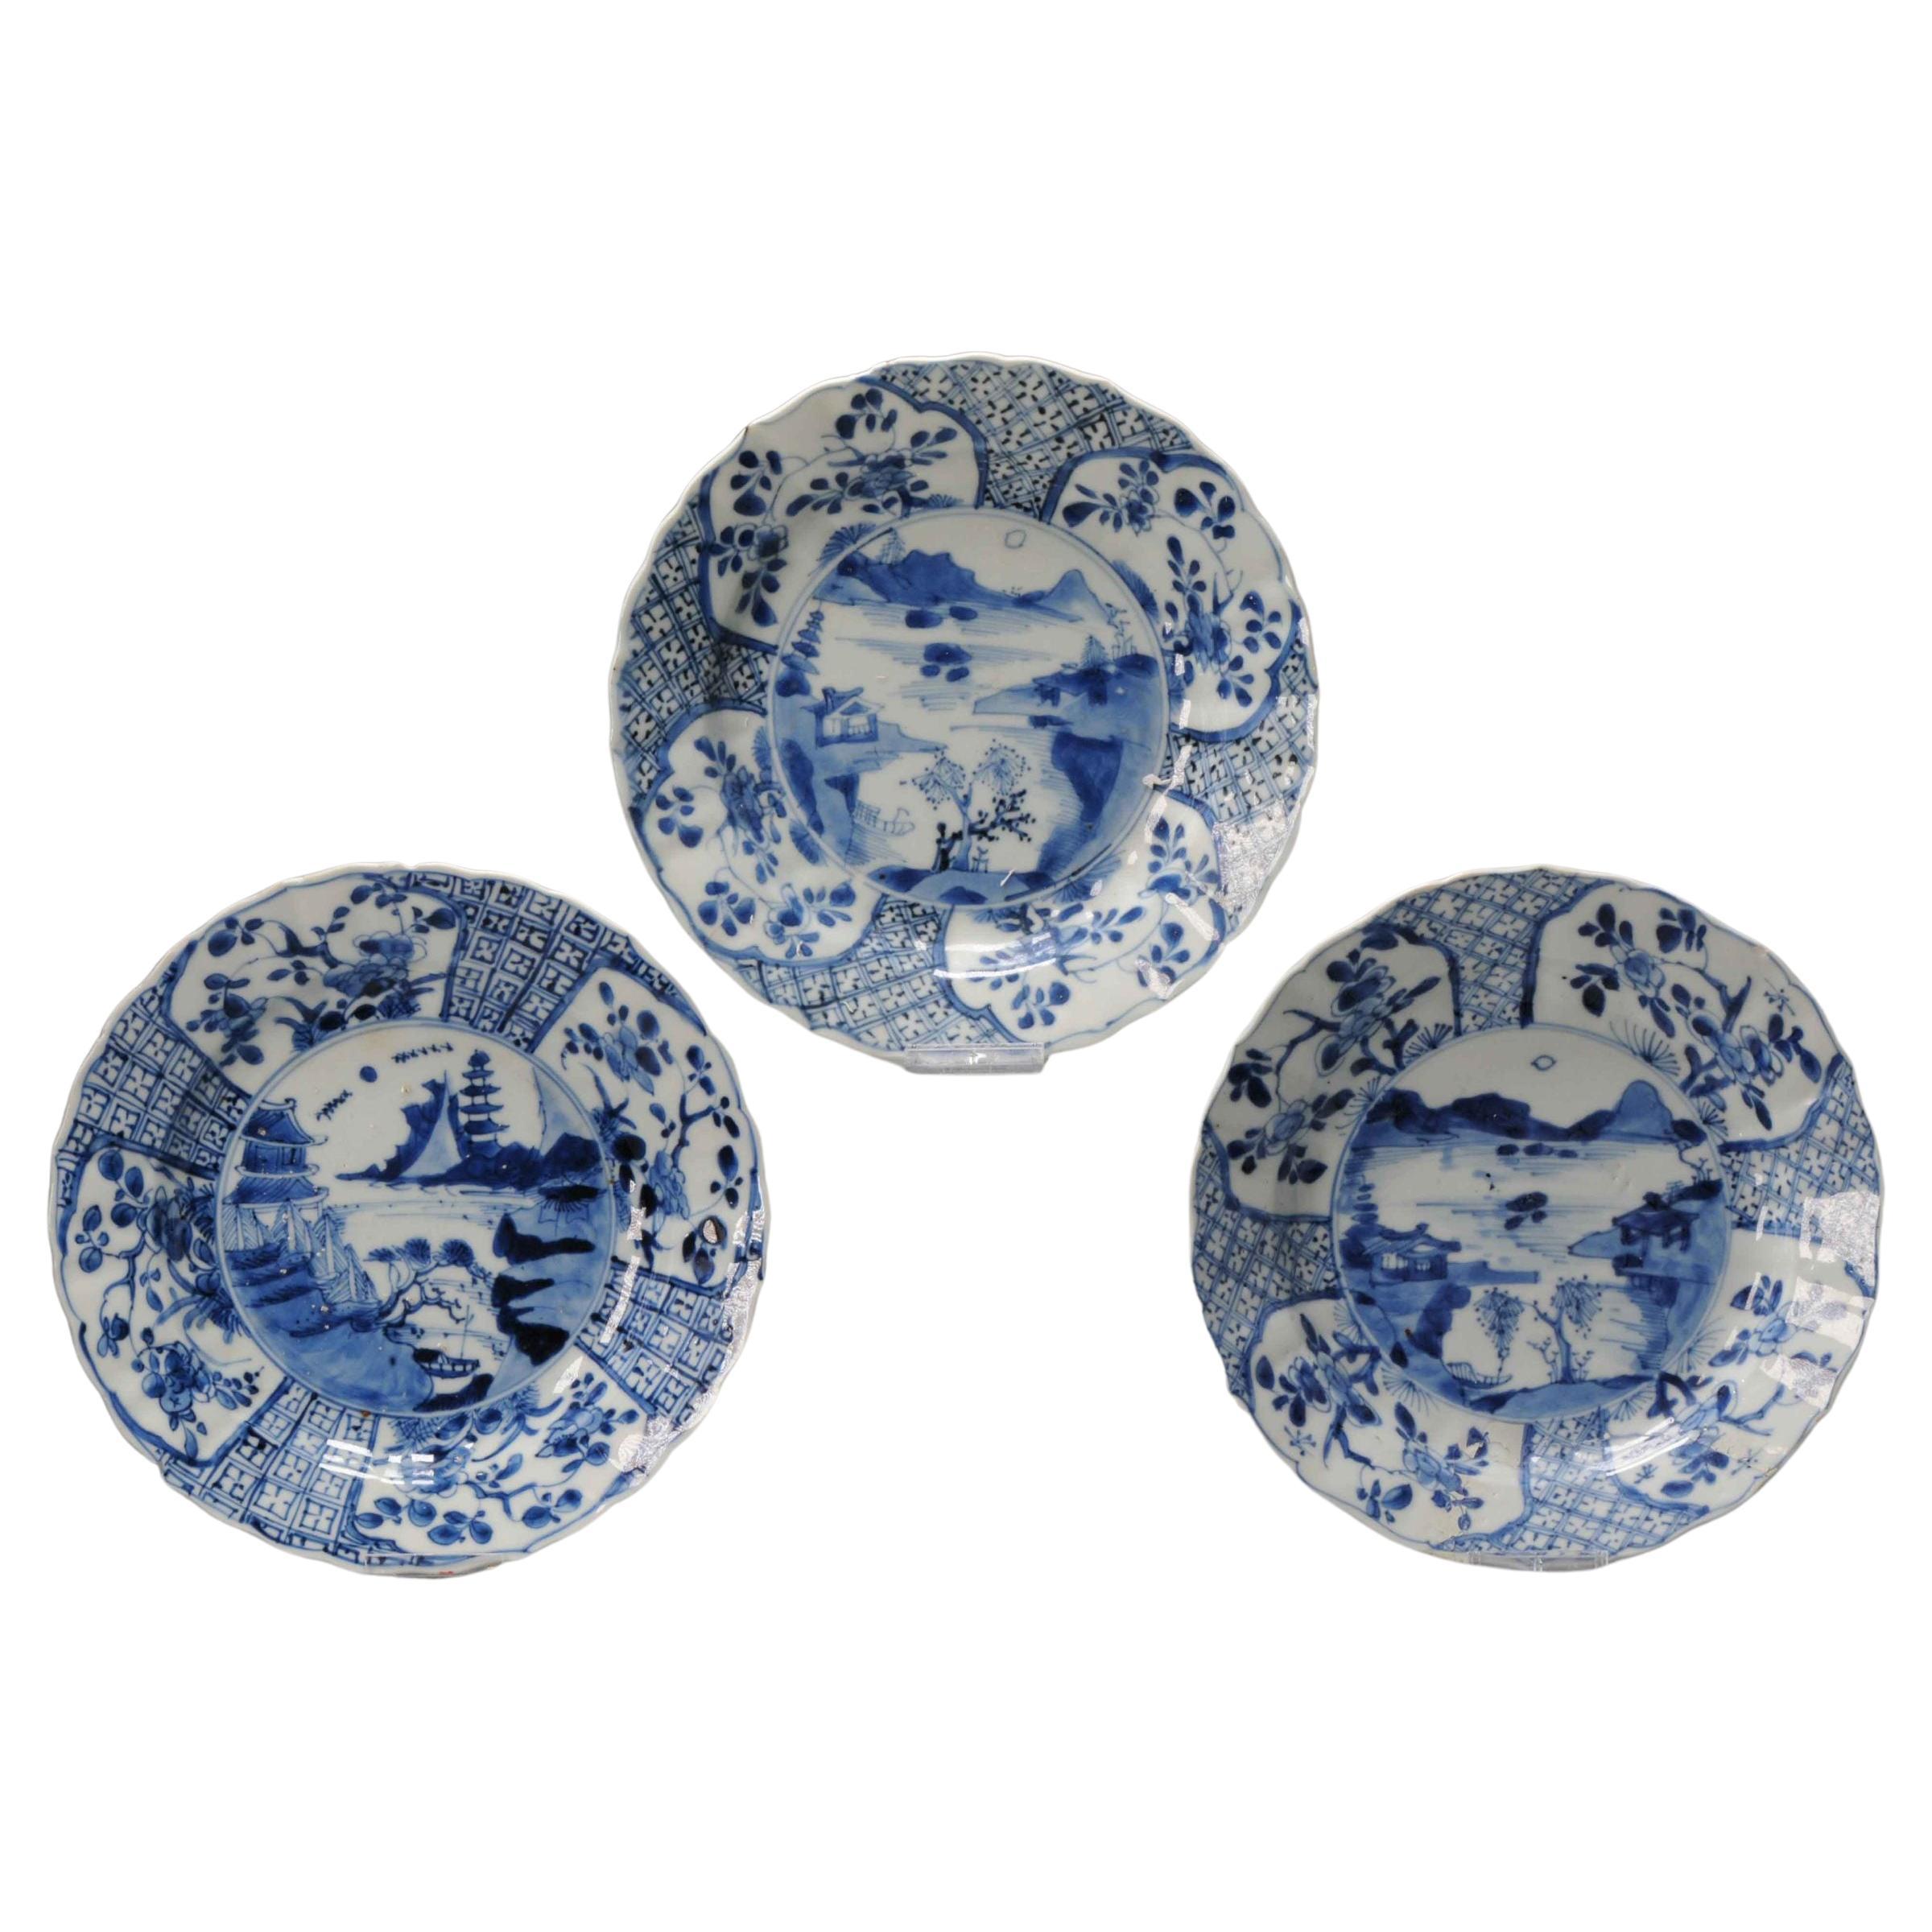 Set of 3 Kangxi Period Chinese Porcelain Landscape Blue White Plates For Sale